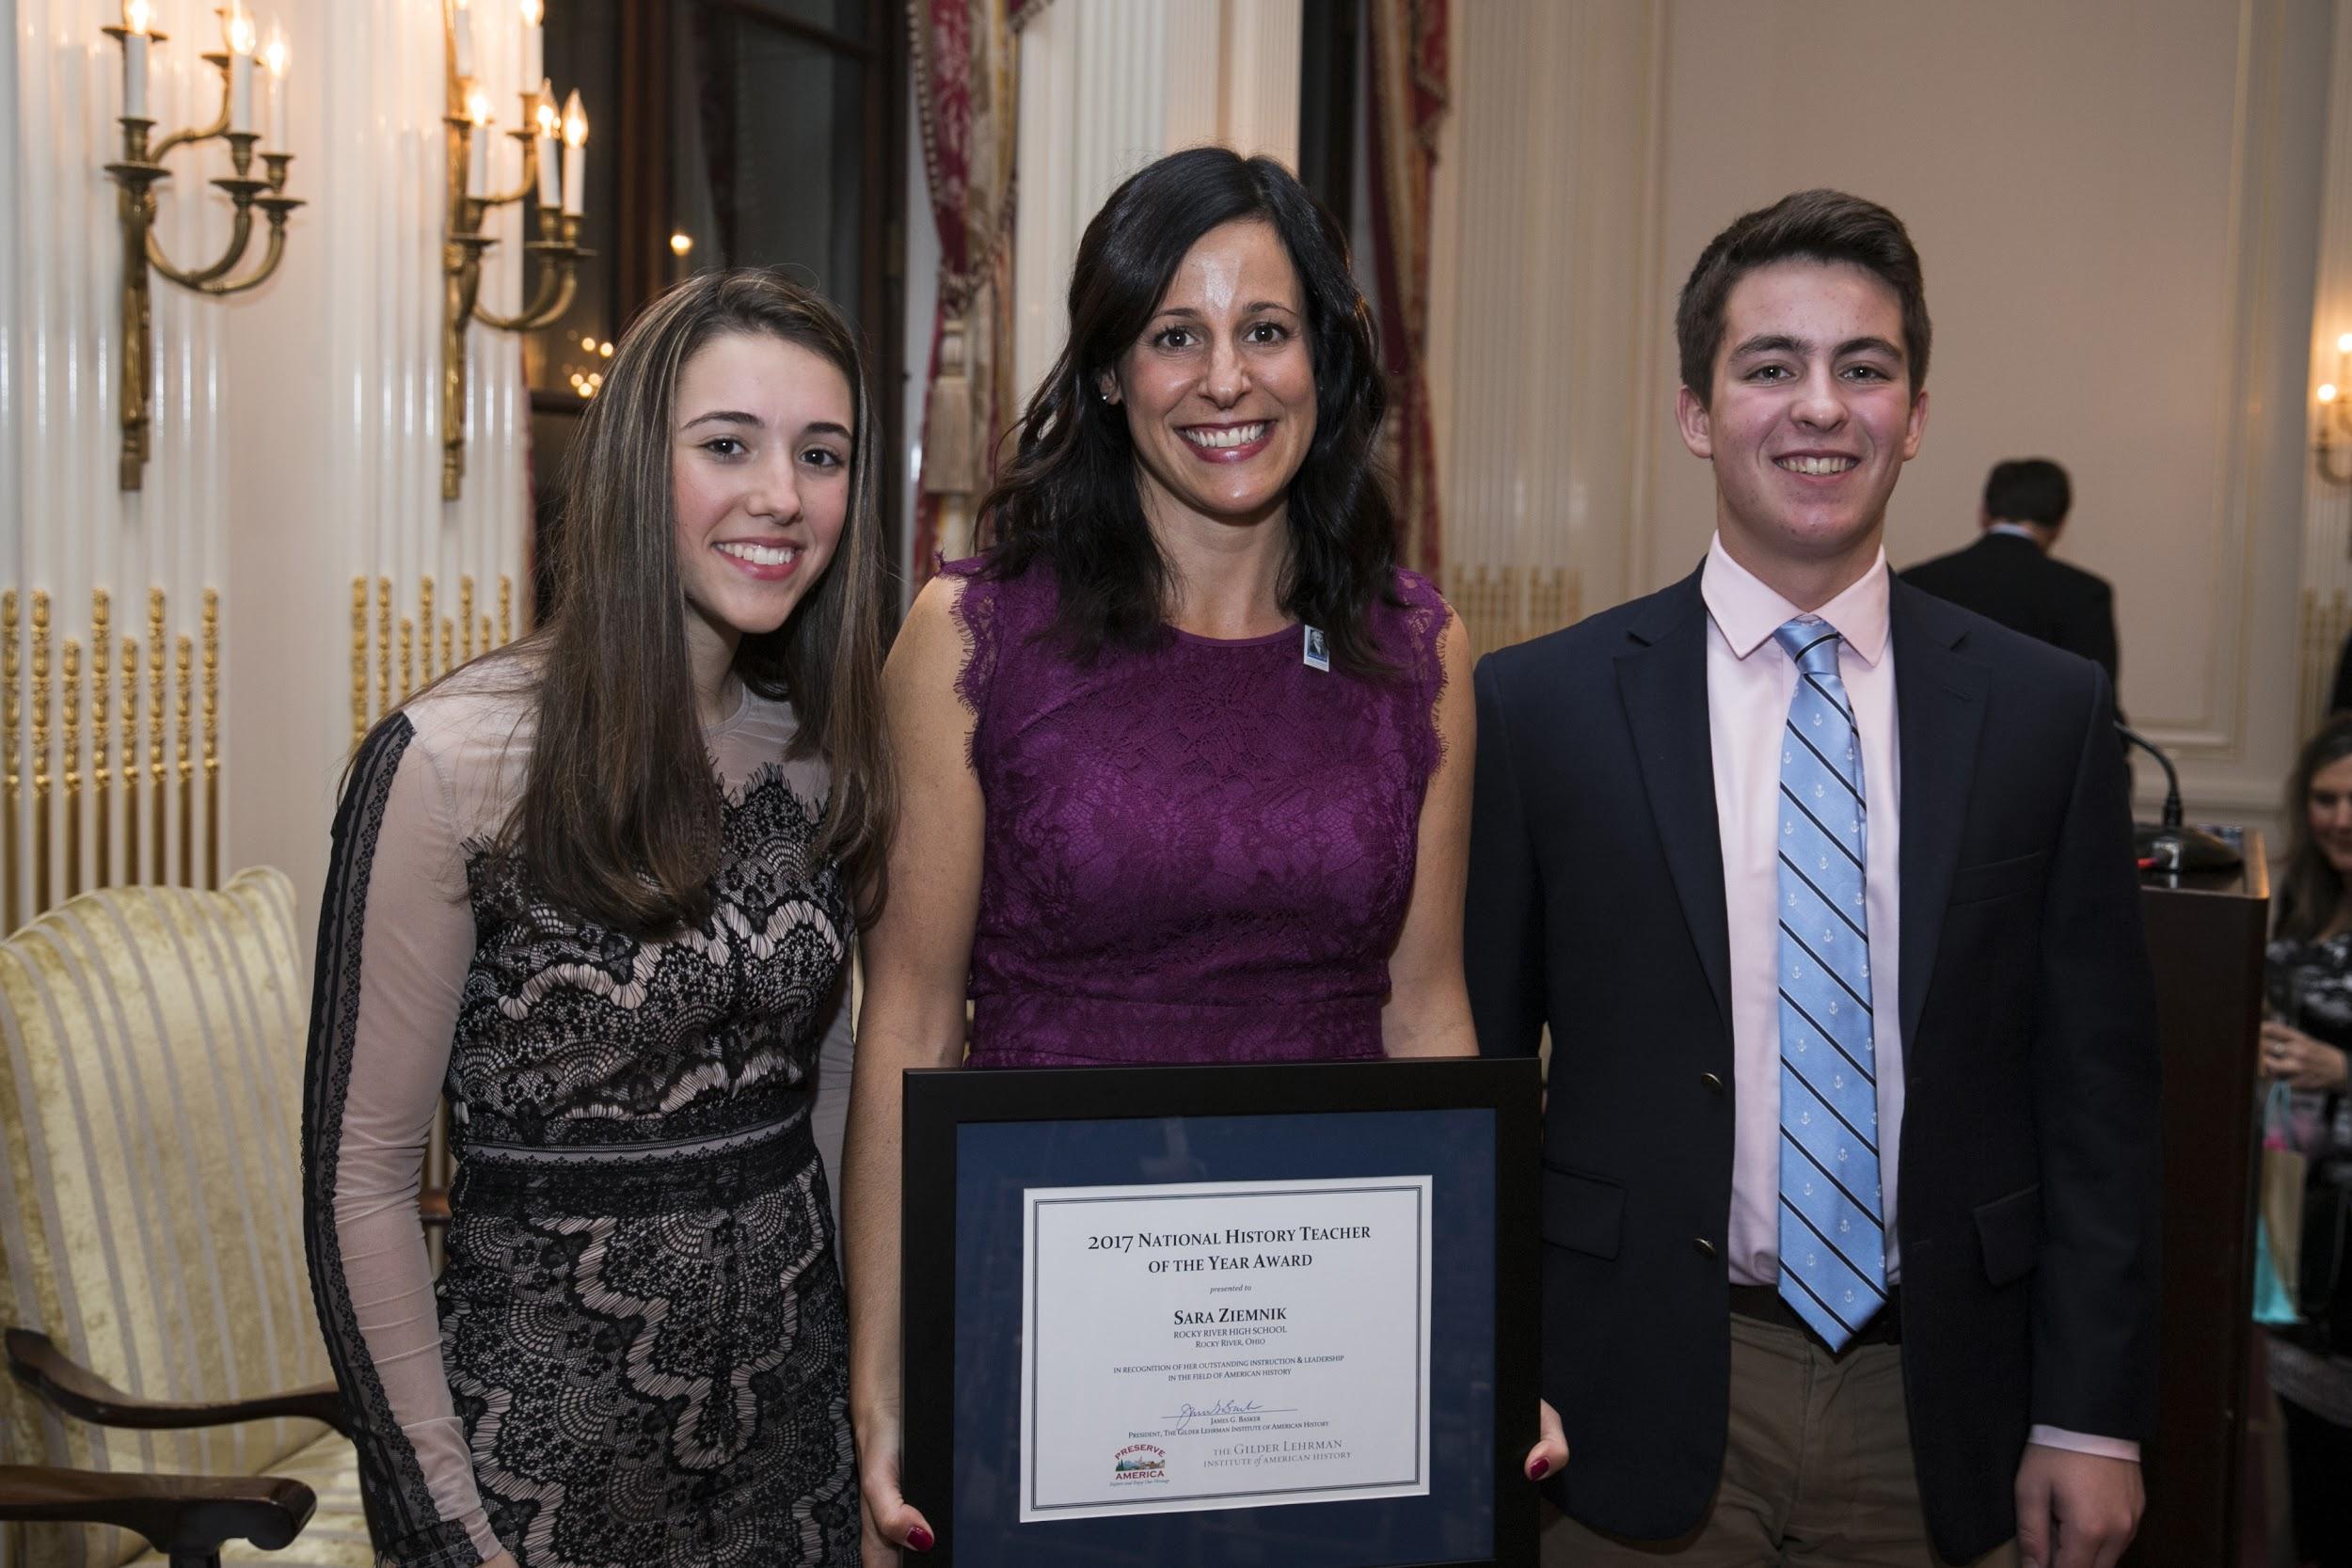 Two of Ziemnik’s students from Rocky River High School, Adam Hackett and Julia Paynard, praised Ziemnik for her innovative teaching style, which sparked their love of history